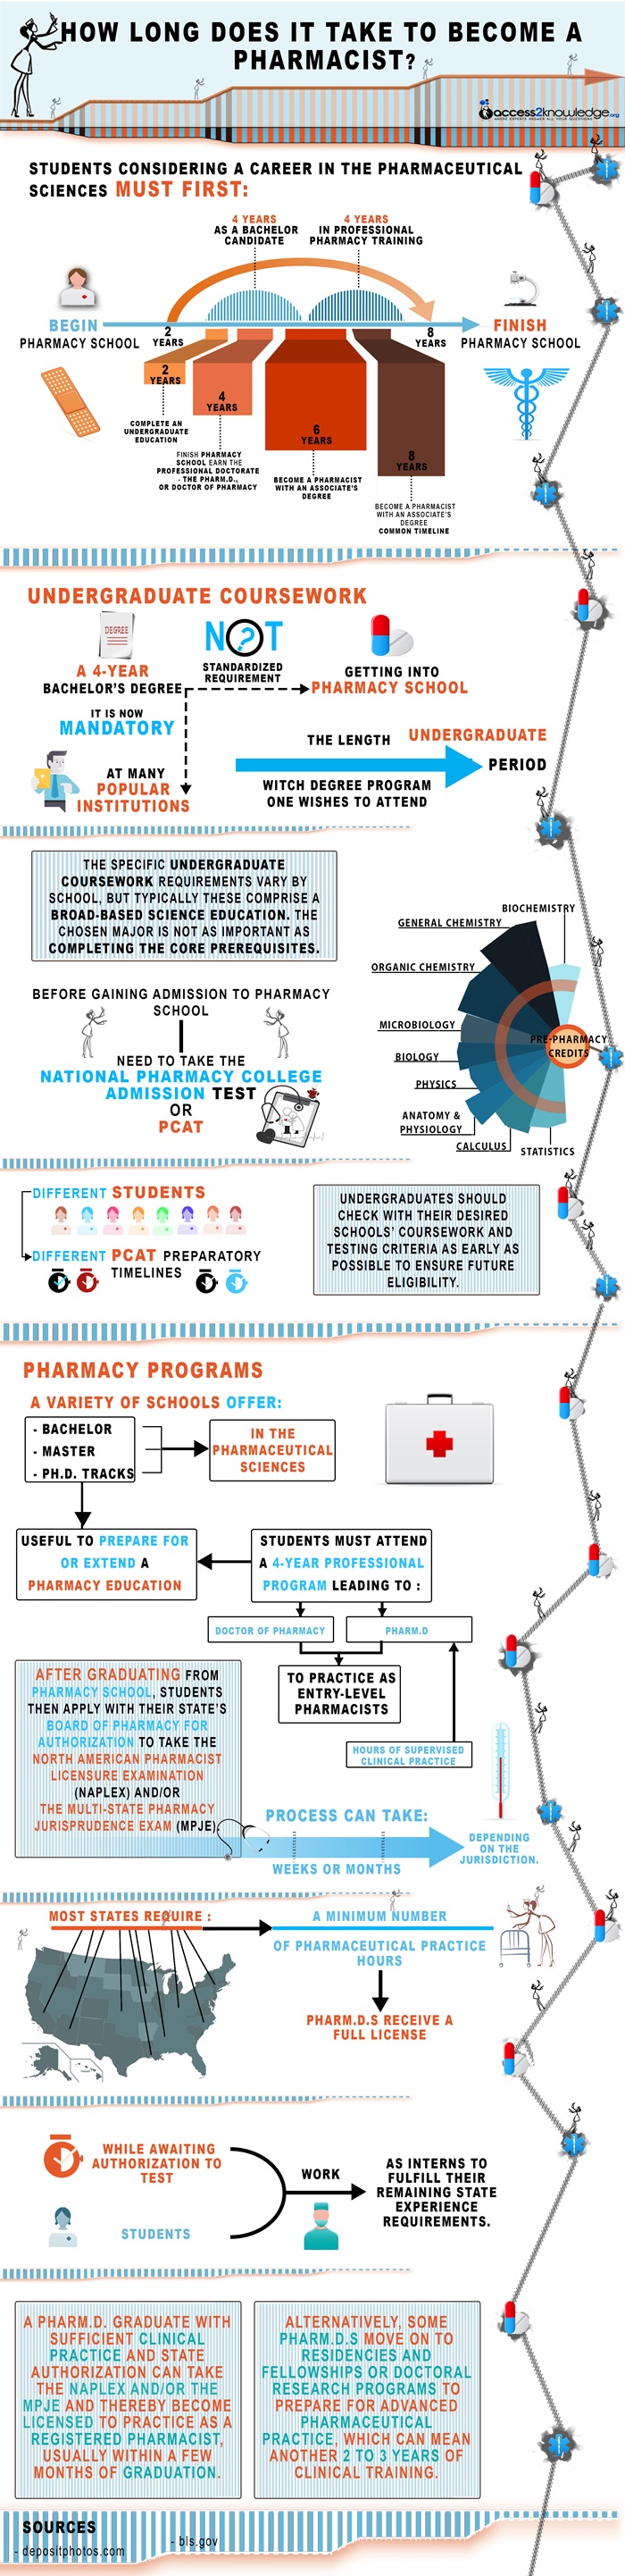 how long does it take to become a pharmacist